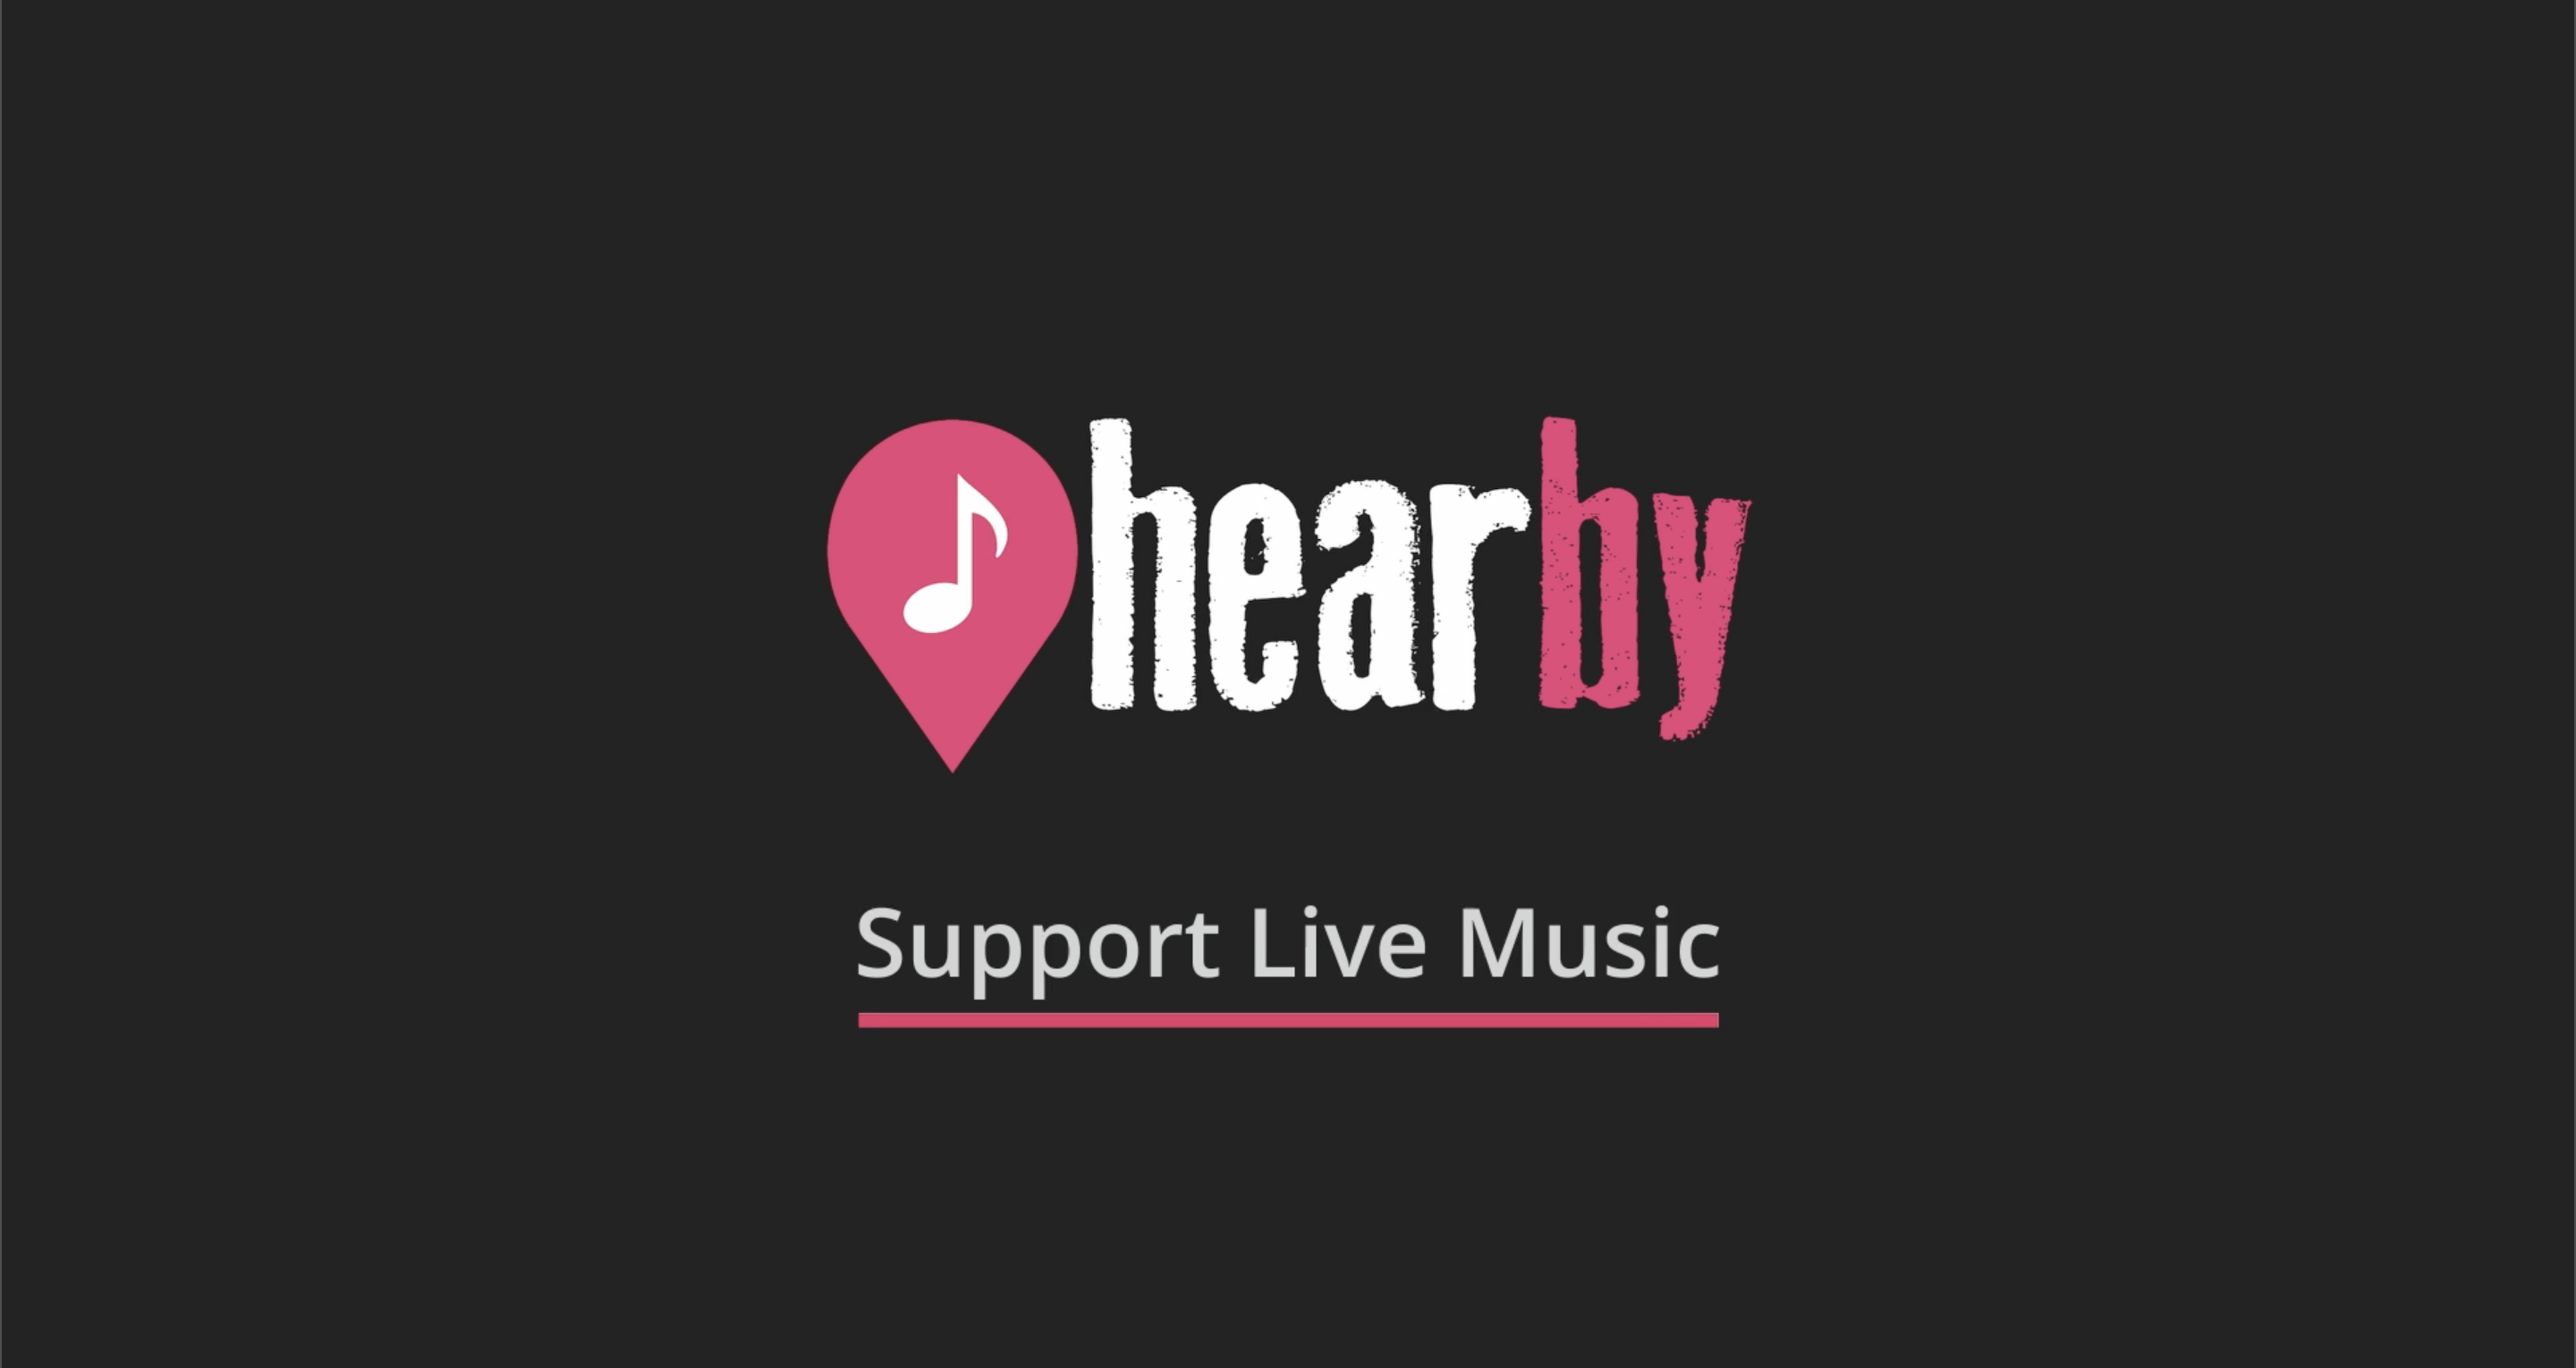 [Hearby logo] Support live music.